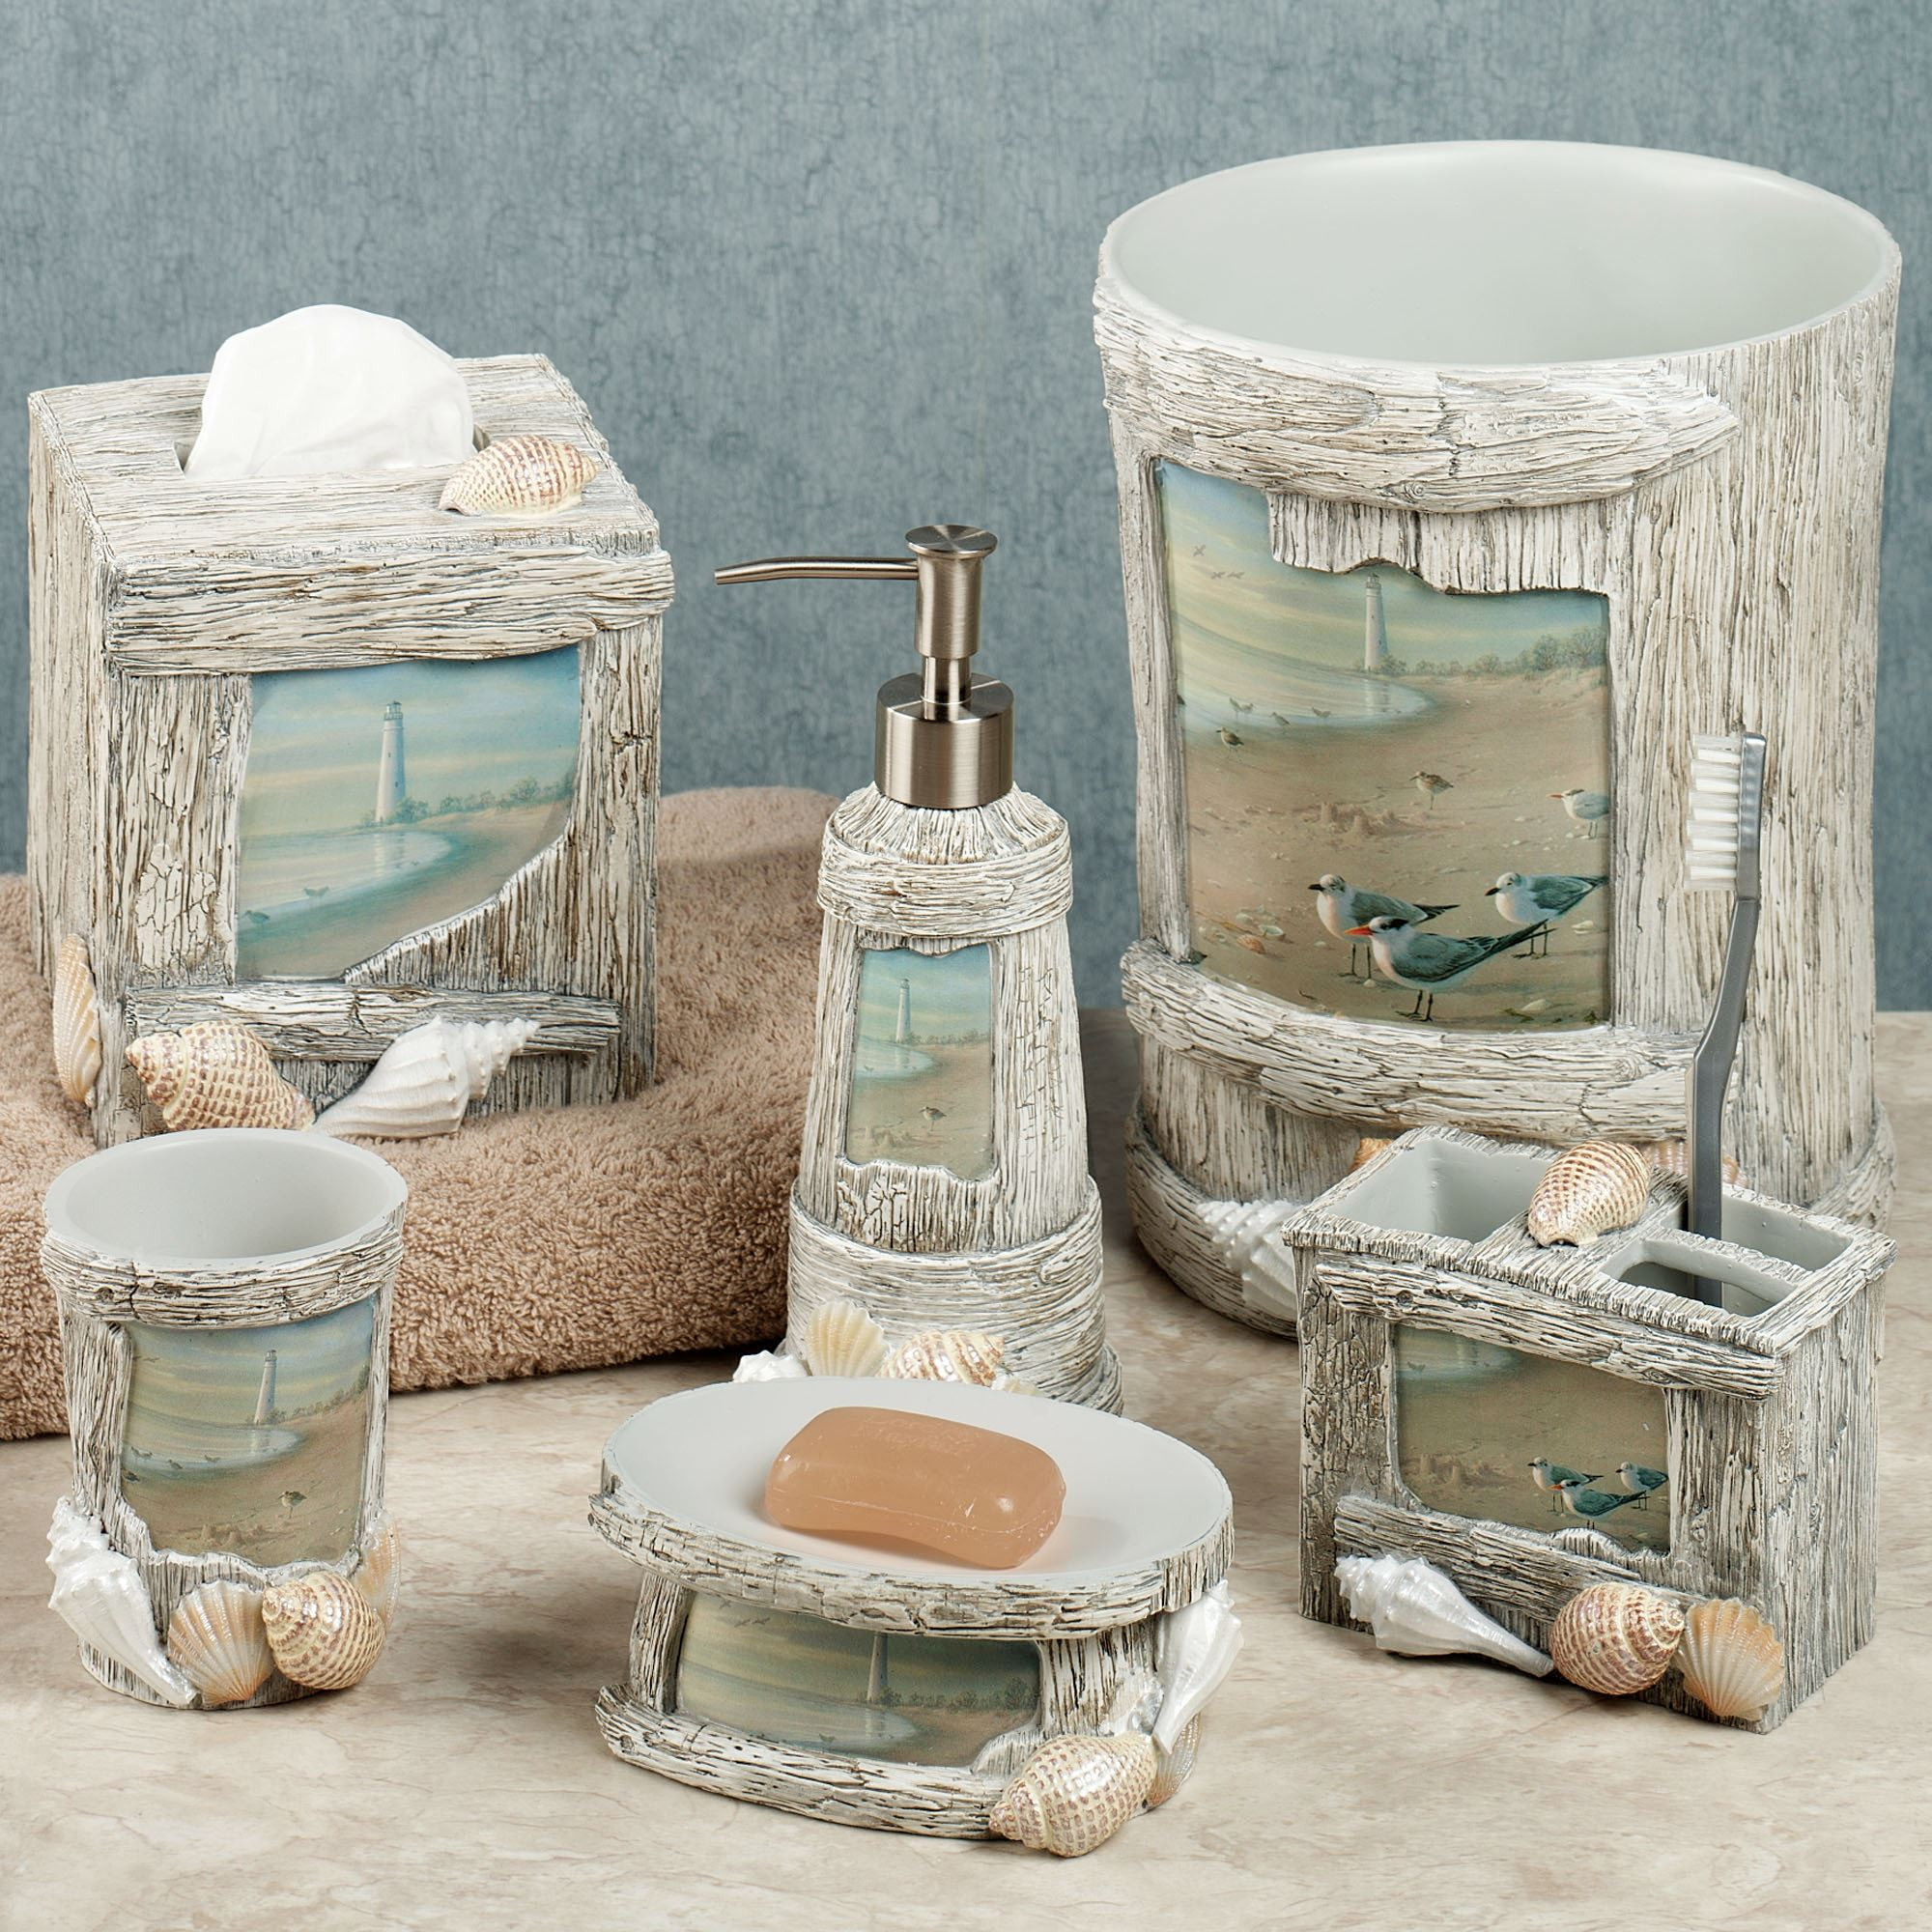 Bathroom Shower Accessories
 17 Ideas of Beach Wall Decor and Other Cute Accessories